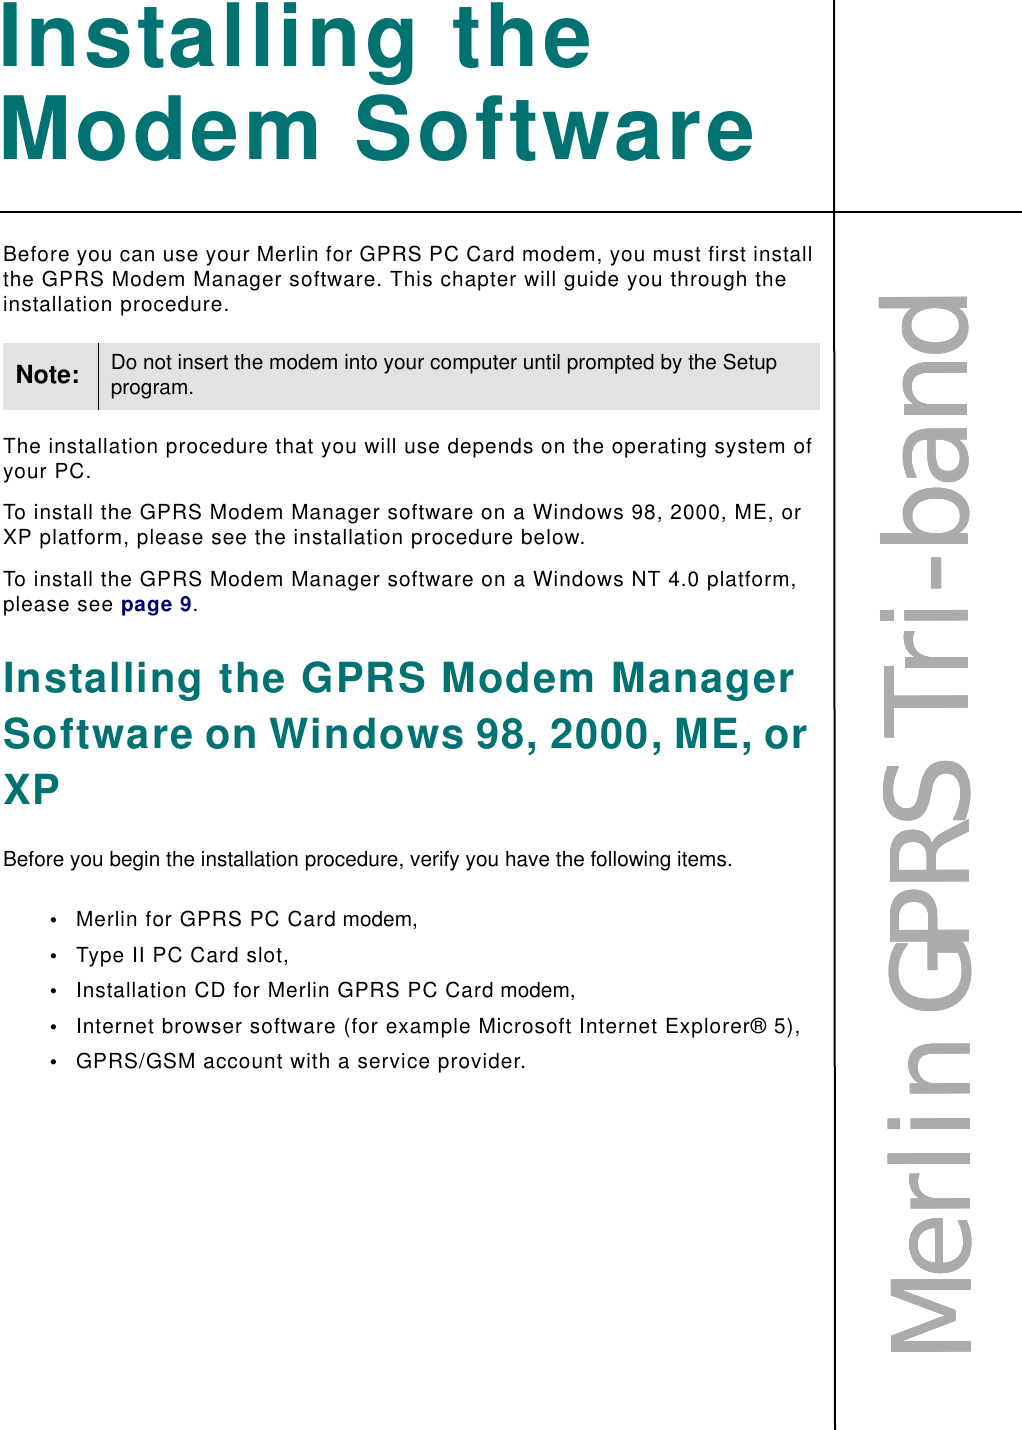 MMMMeeeerrrrlllliiiinnnn    GGGGPPPPRRRRSSSS    TTTTrrrriiii----bbbbaaaannnnddddInstalling the Modem SoftwareBefore you can use your Merlin for GPRS PC Card modem, you must first install the GPRS Modem Manager software. This chapter will guide you through the installation procedure.The installation procedure that you will use depends on the operating system of your PC.To install the GPRS Modem Manager software on a Windows 98, 2000, ME, or XP platform, please see the installation procedure below.To install the GPRS Modem Manager software on a Windows NT 4.0 platform, please see page 9.Installing the GPRS Modem Manager Software on Windows 98, 2000, ME, or XPBefore you begin the installation procedure, verify you have the following items.•Merlin for GPRS PC Card modem,•Type II PC Card slot,•Installation CD for Merlin GPRS PC Card modem,•Internet browser software (for example Microsoft Internet Explorer® 5),•GPRS/GSM account with a service provider.Note: Do not insert the modem into your computer until prompted by the Setup program.